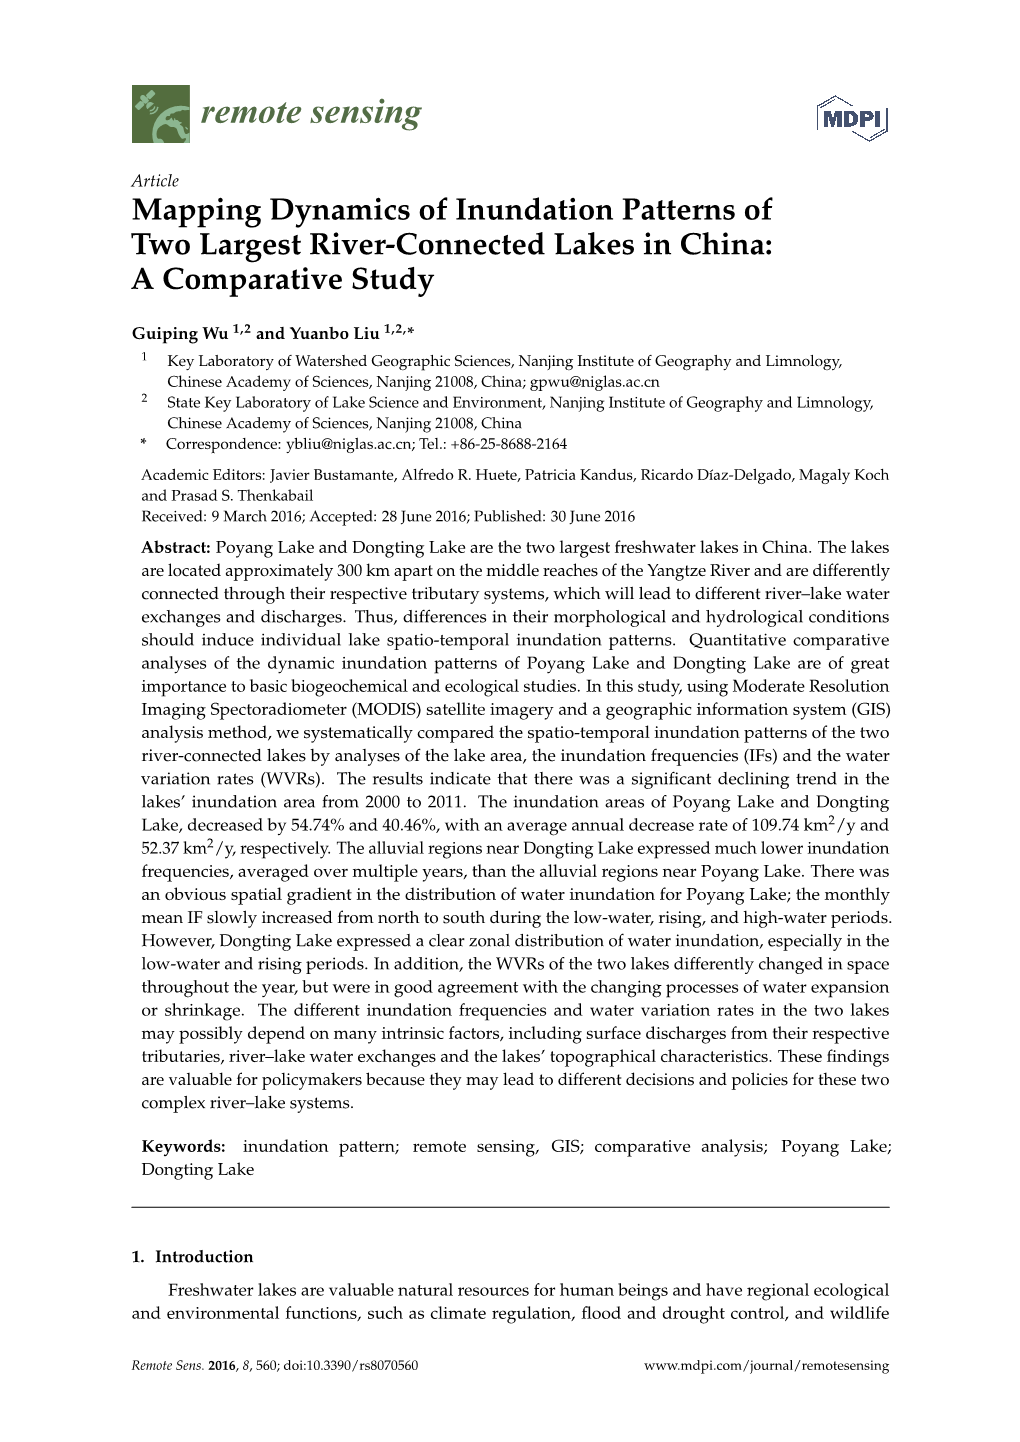 Mapping Dynamics of Inundation Patterns of Two Largest River-Connected Lakes in China: a Comparative Study